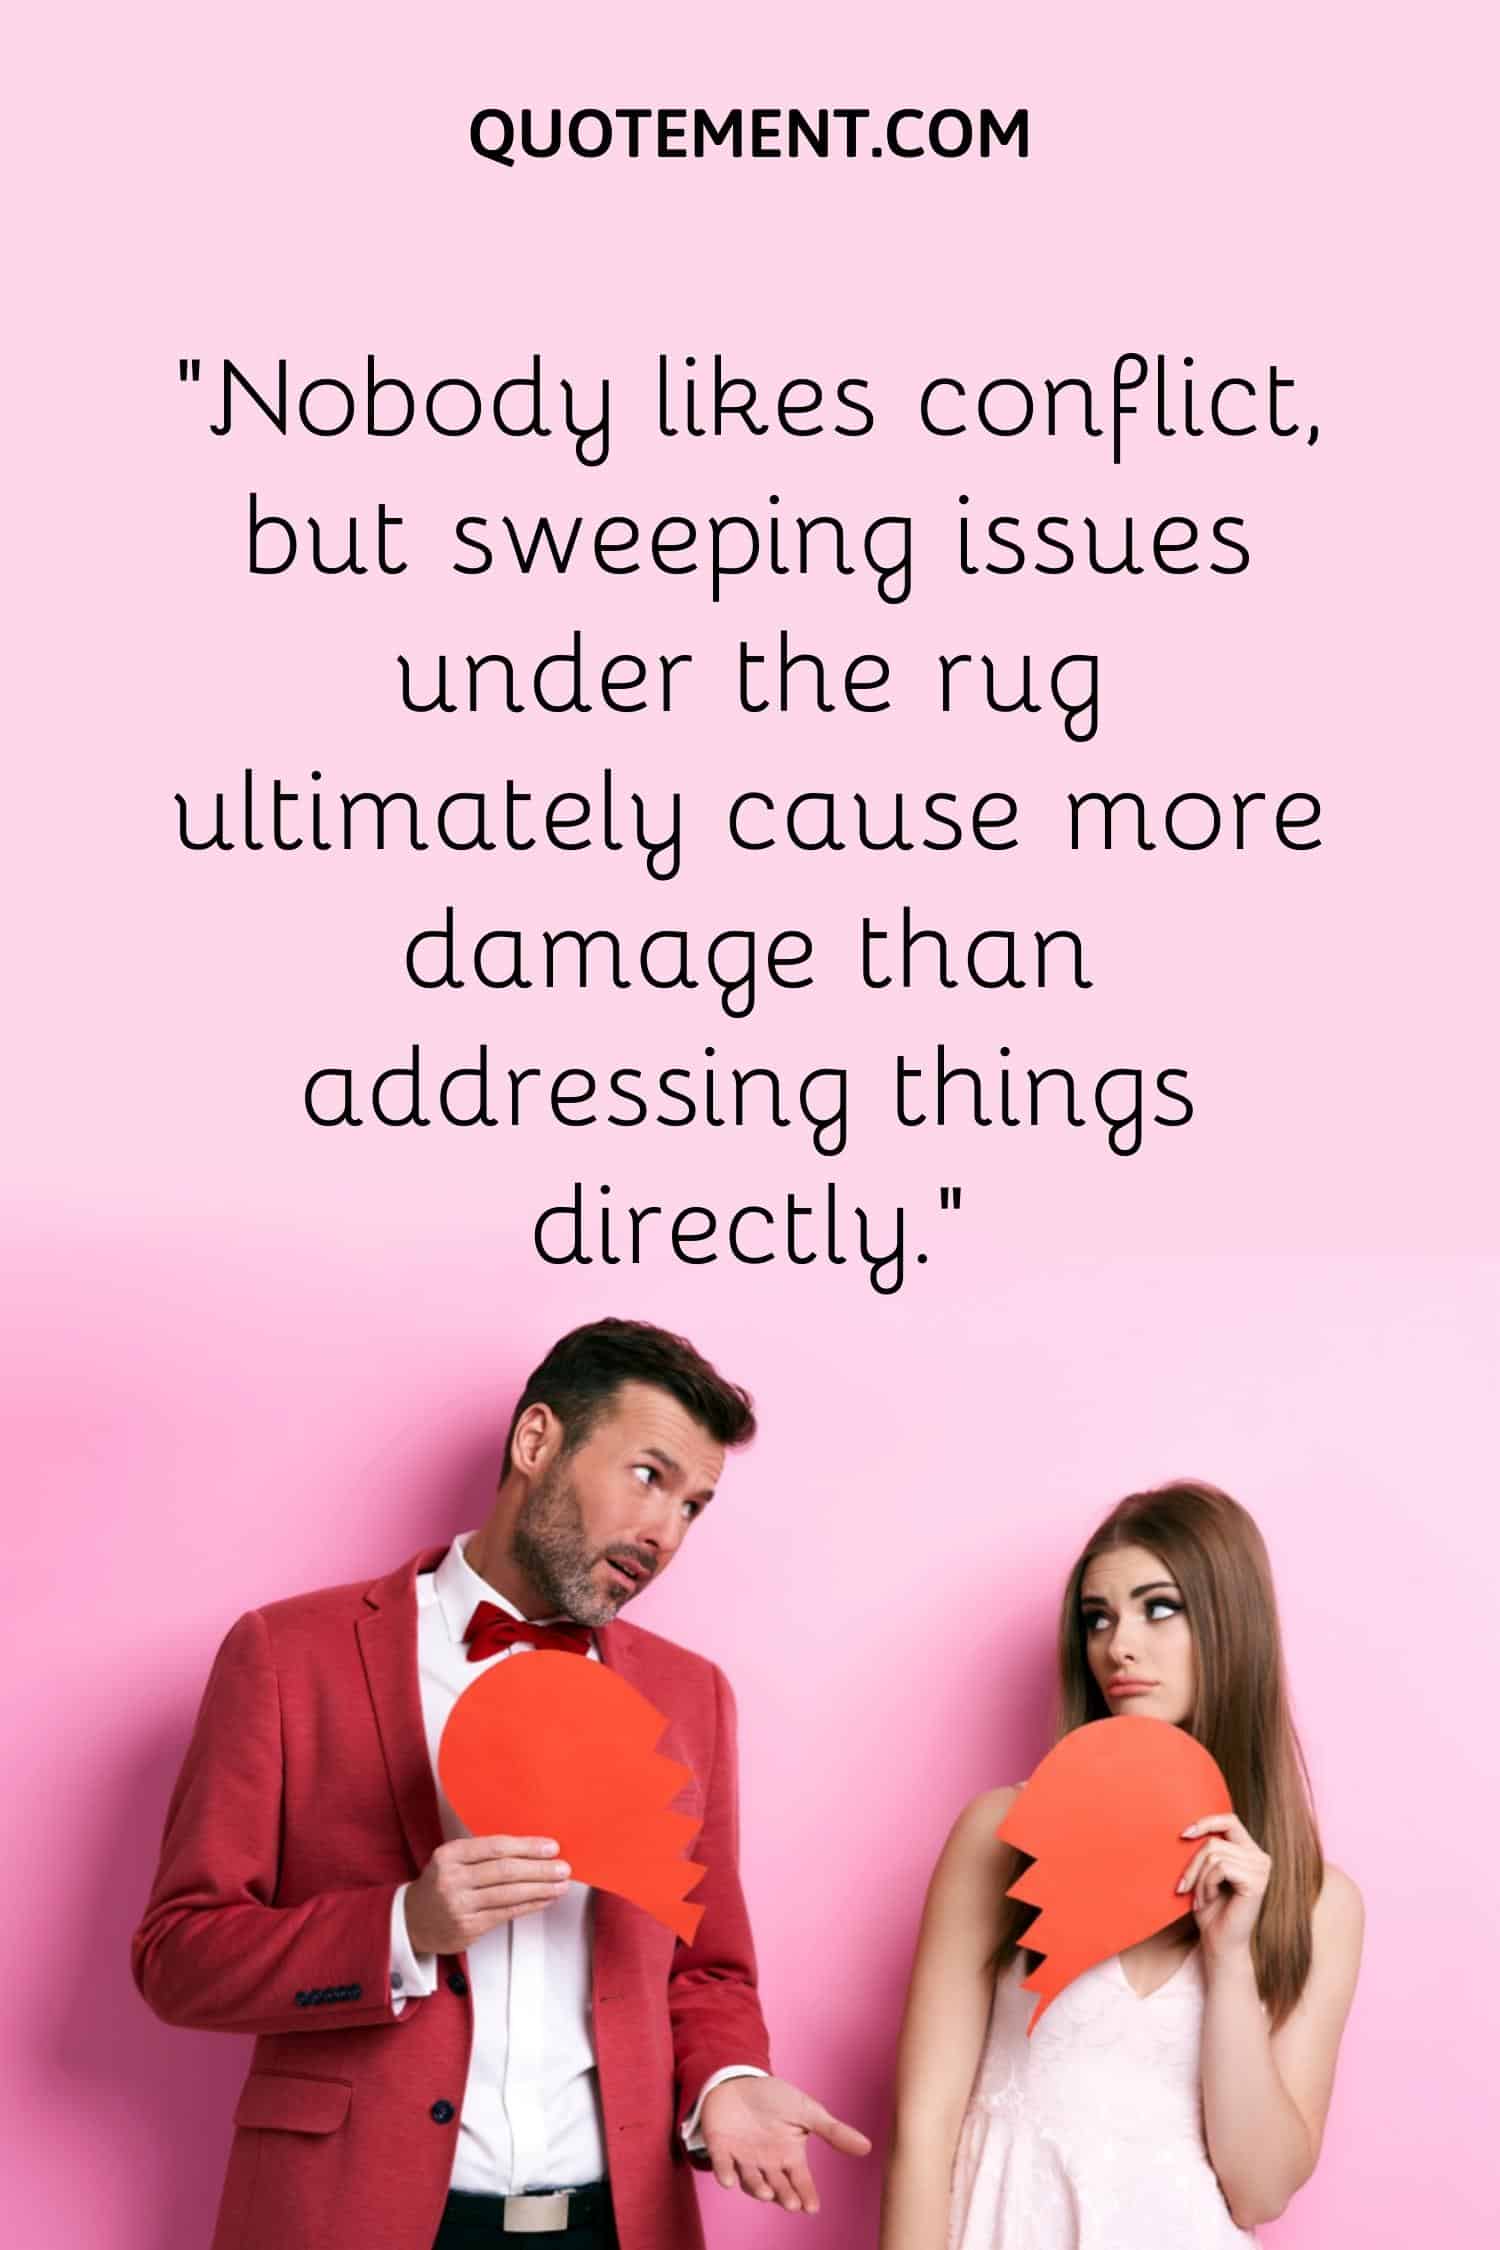 . “Nobody likes conflict, but sweeping issues under the rug ultimately cause more damage than addressing things directly.”